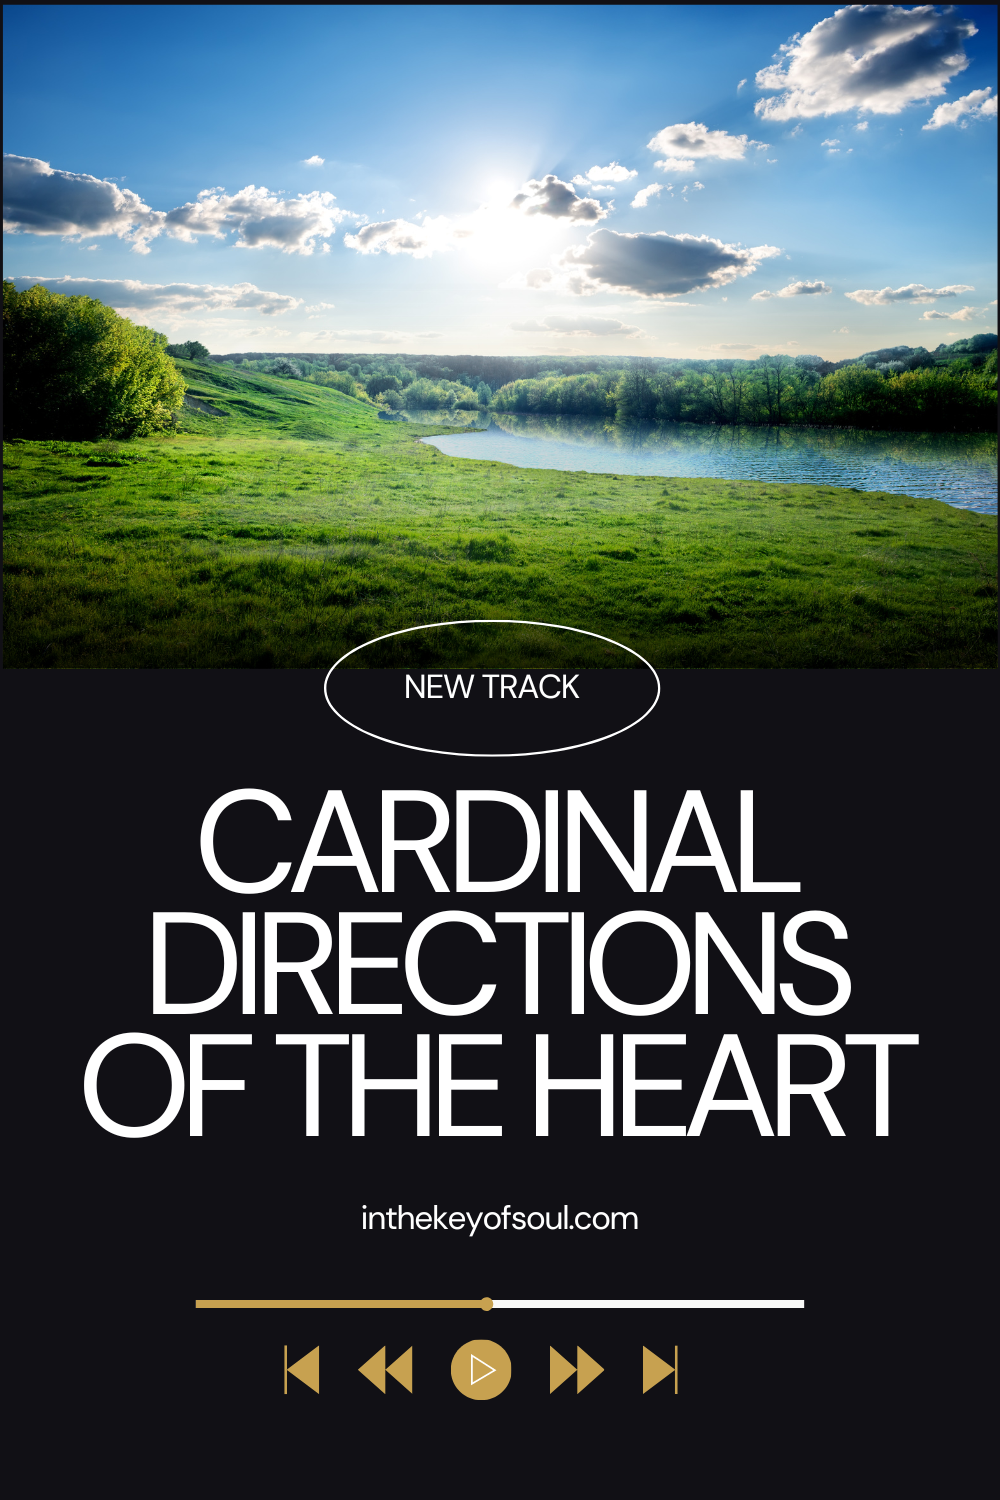 CARDINAL DIRECTIONS OF THE HEART